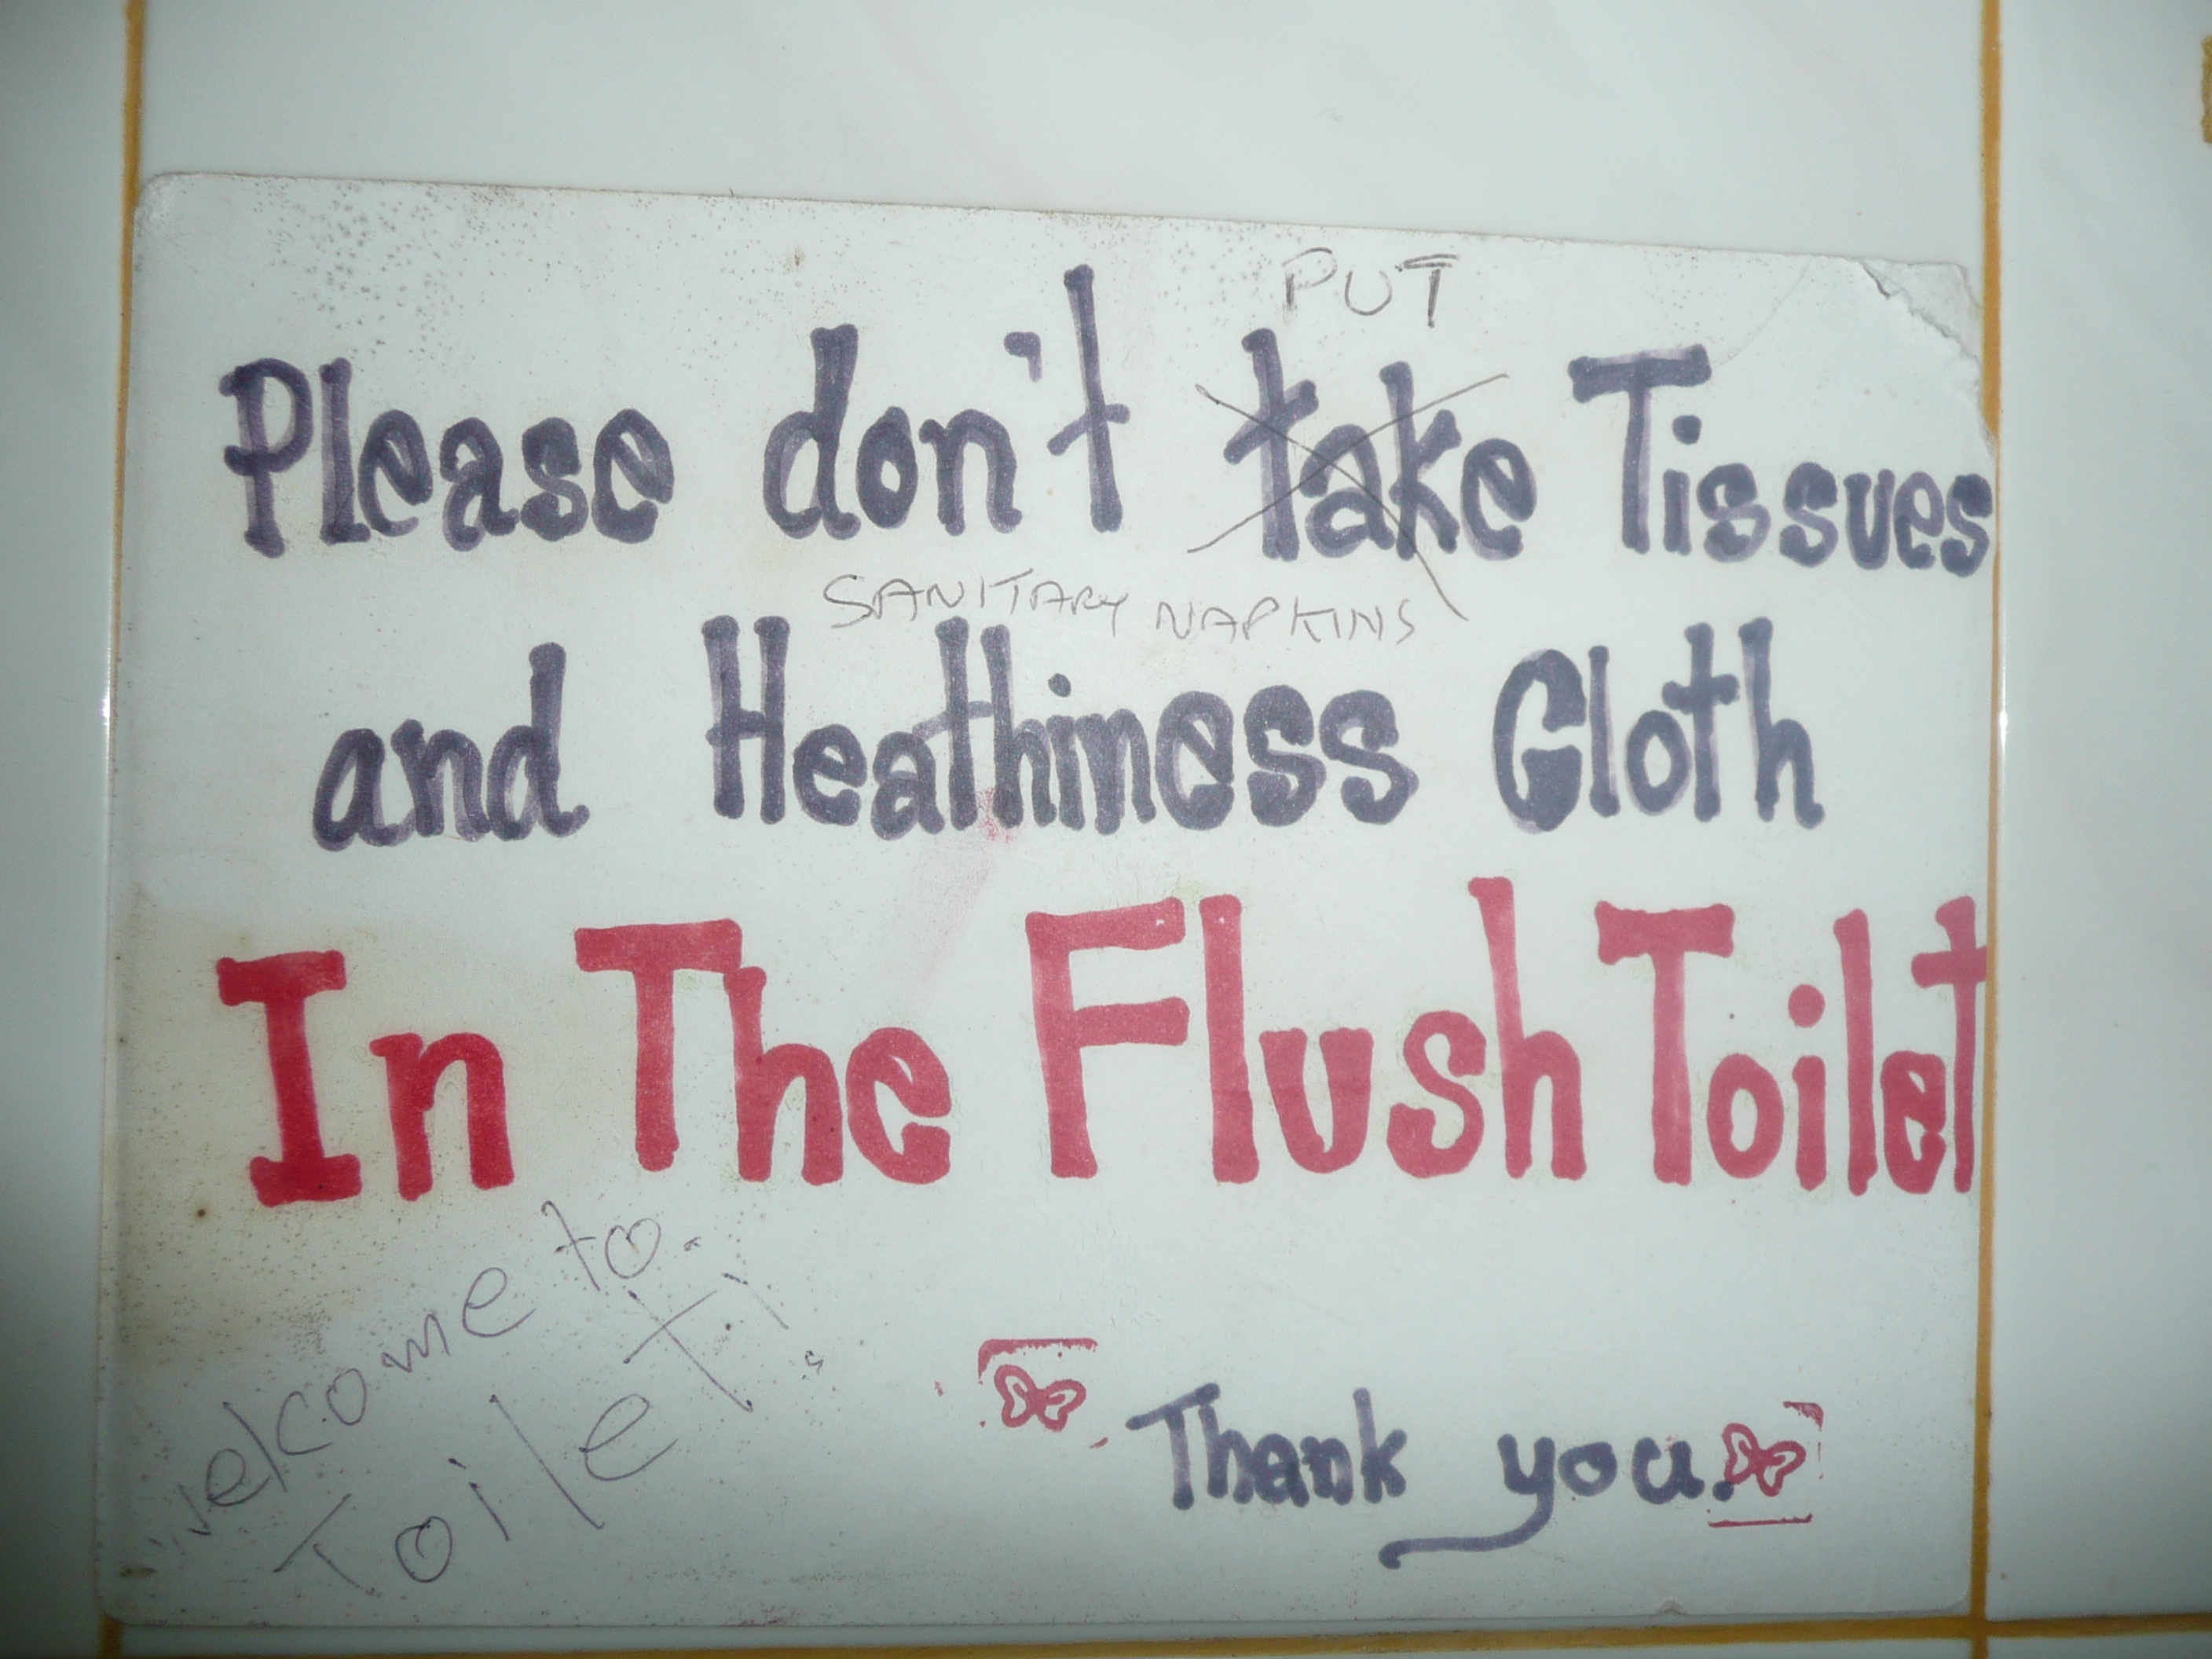 writing - Sanitary Napkins Please don't take Tissues and Heathiness Cloth In The Flush Toil So. Thank you se le come to